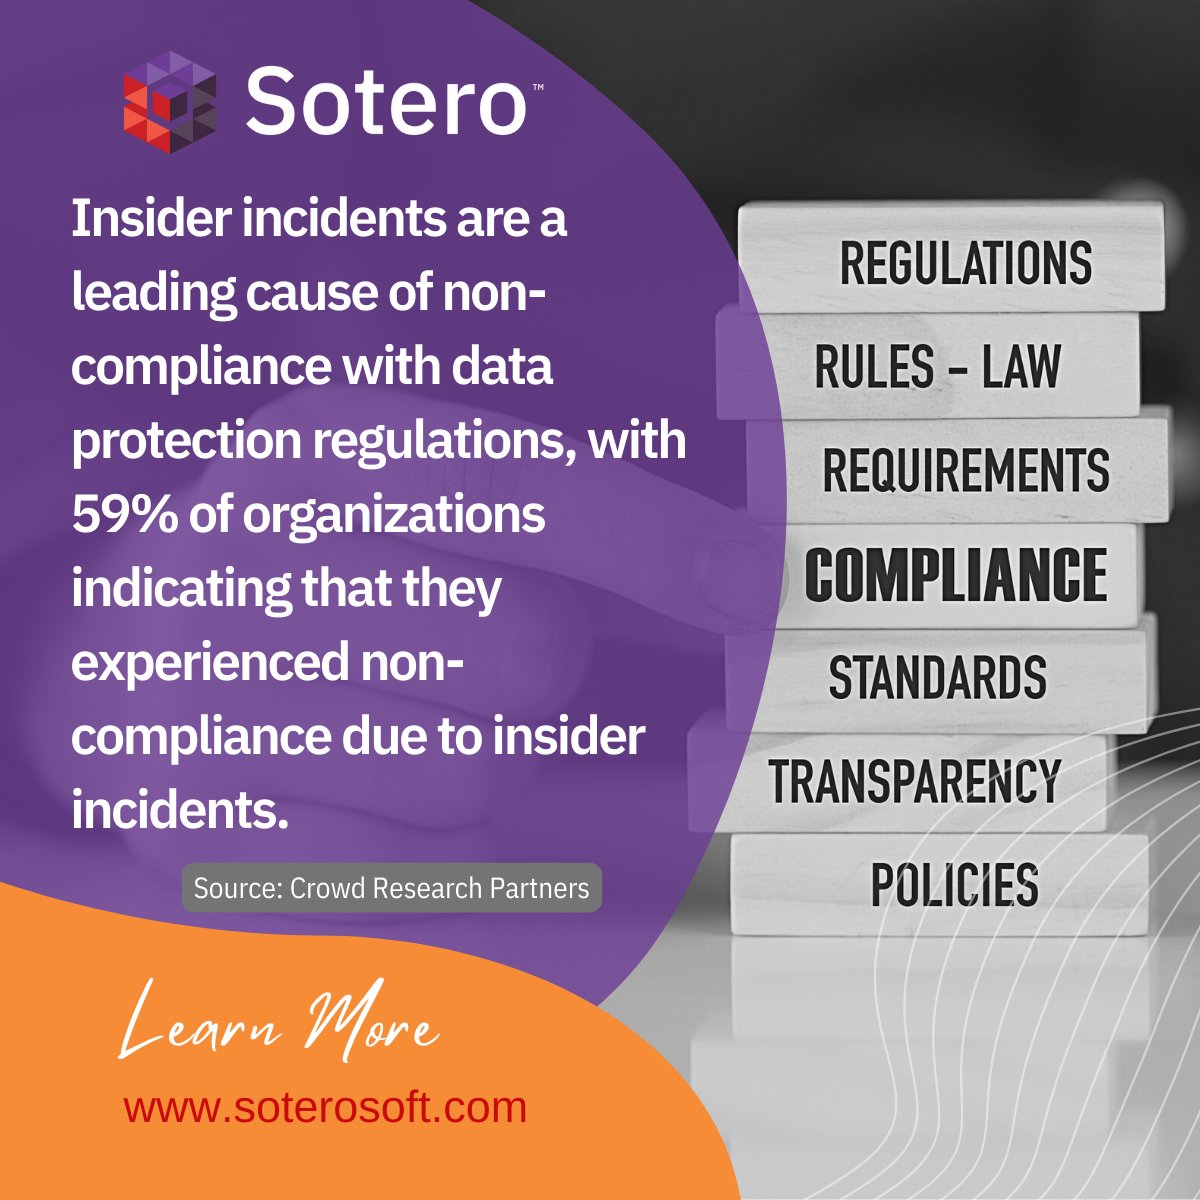 Insider threats are a growing concern for businesses of all sizes. Violating data protection regulations like GDPR or HIPAA due to insider threats can result in severe legal consequences such as fines or lawsuits. Take action to protect your org from security breaches.